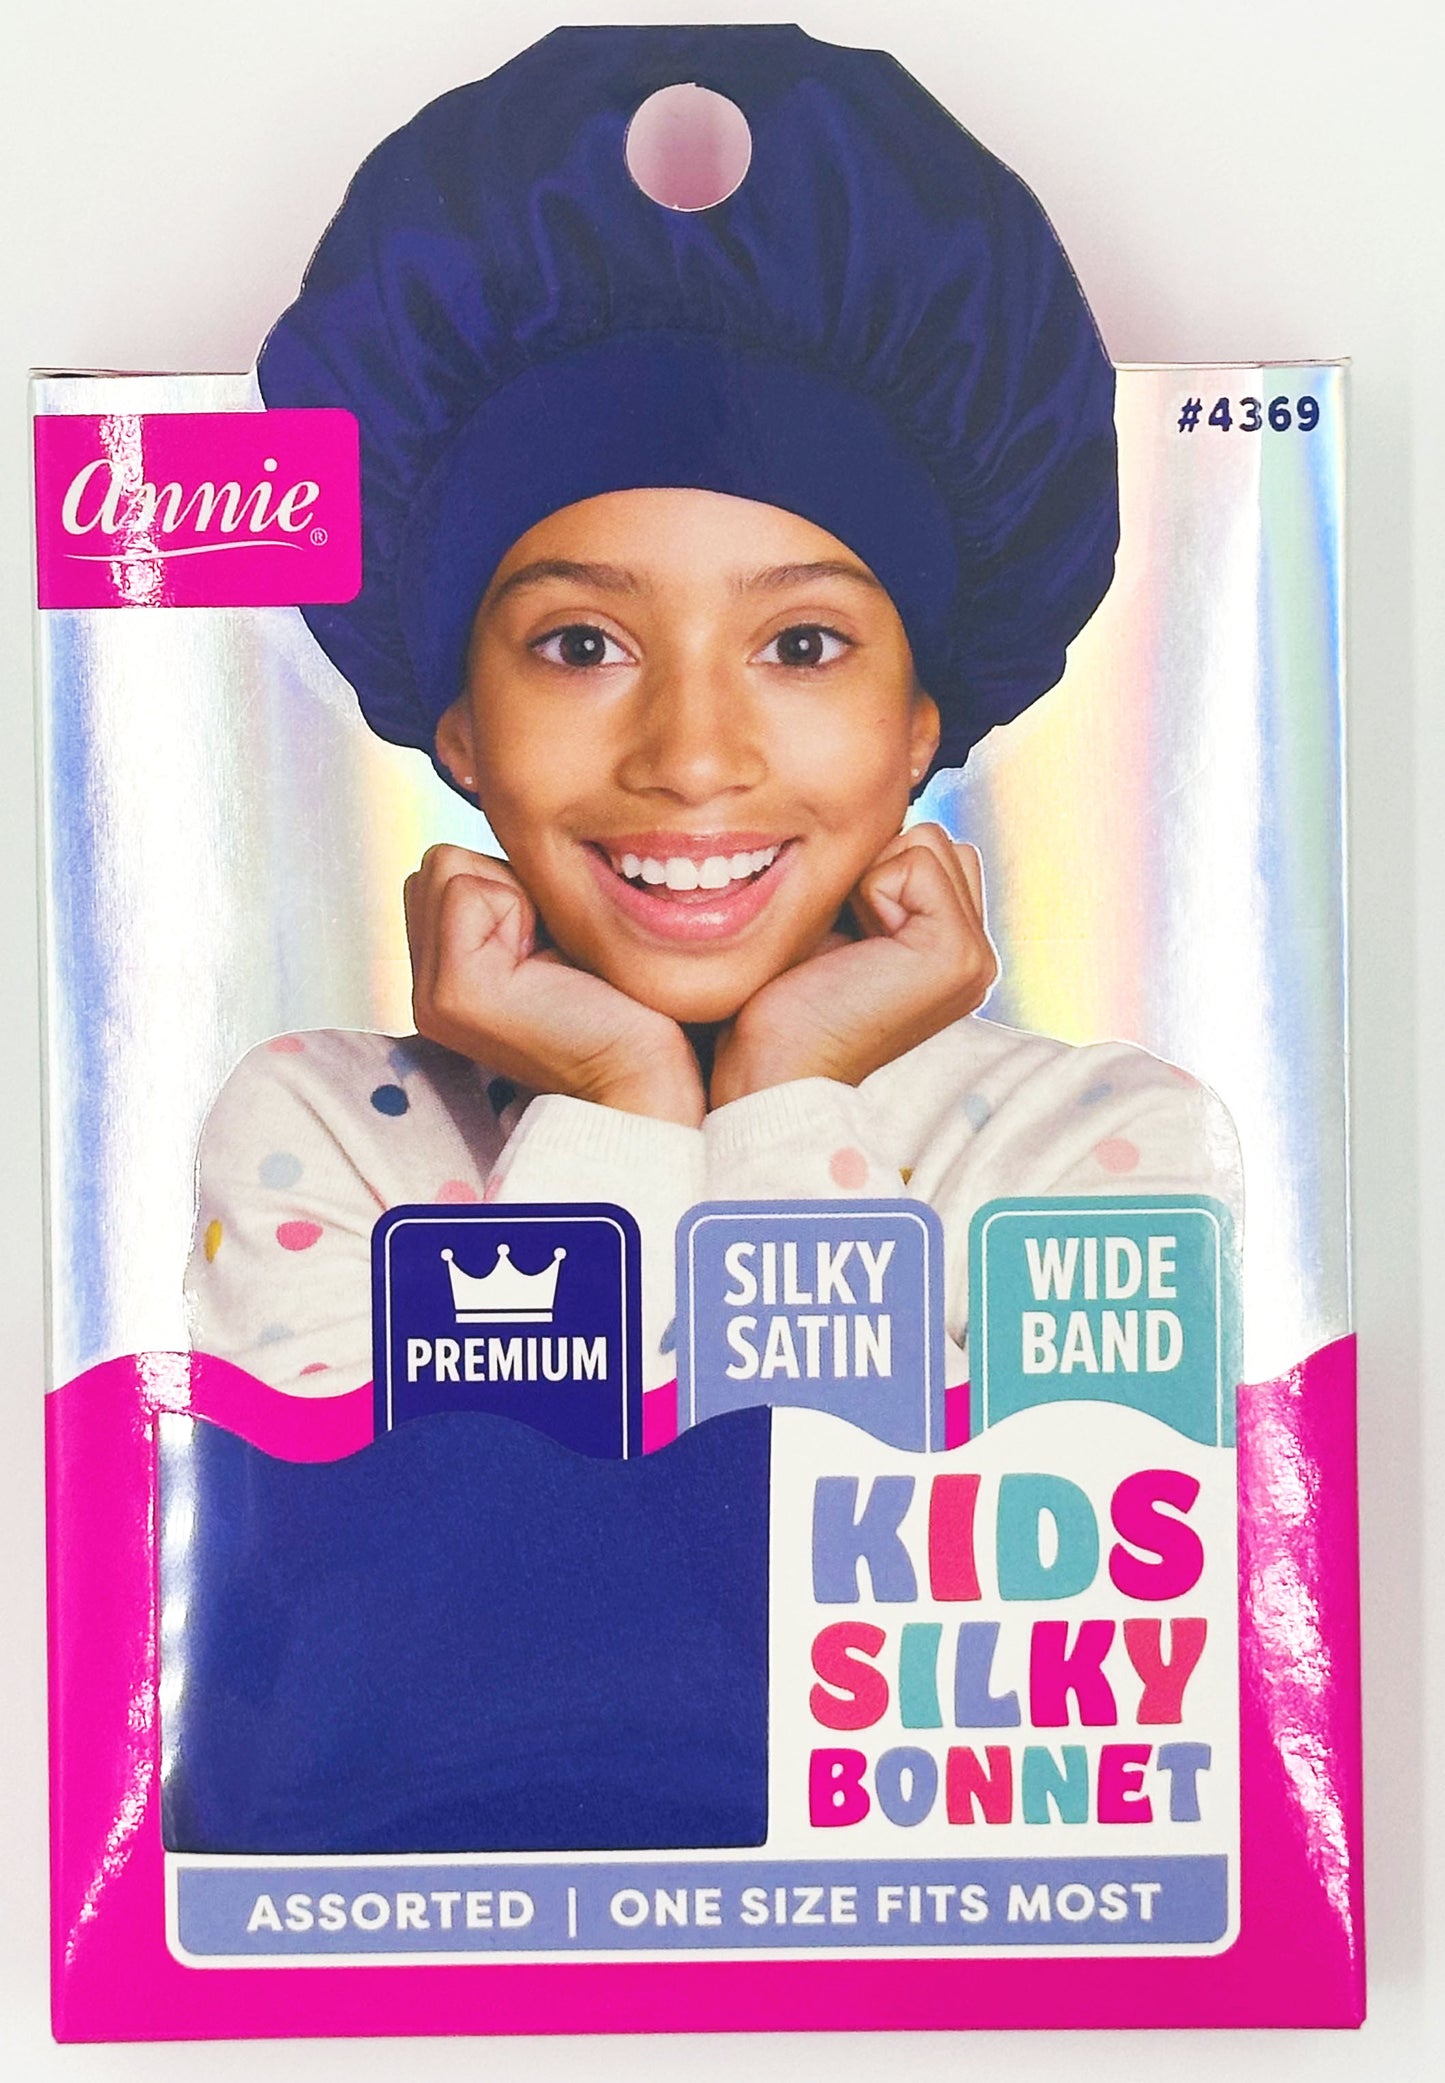 4369 ANNIE KID'S SILKY BONNET WIDE BAND ASSORTED